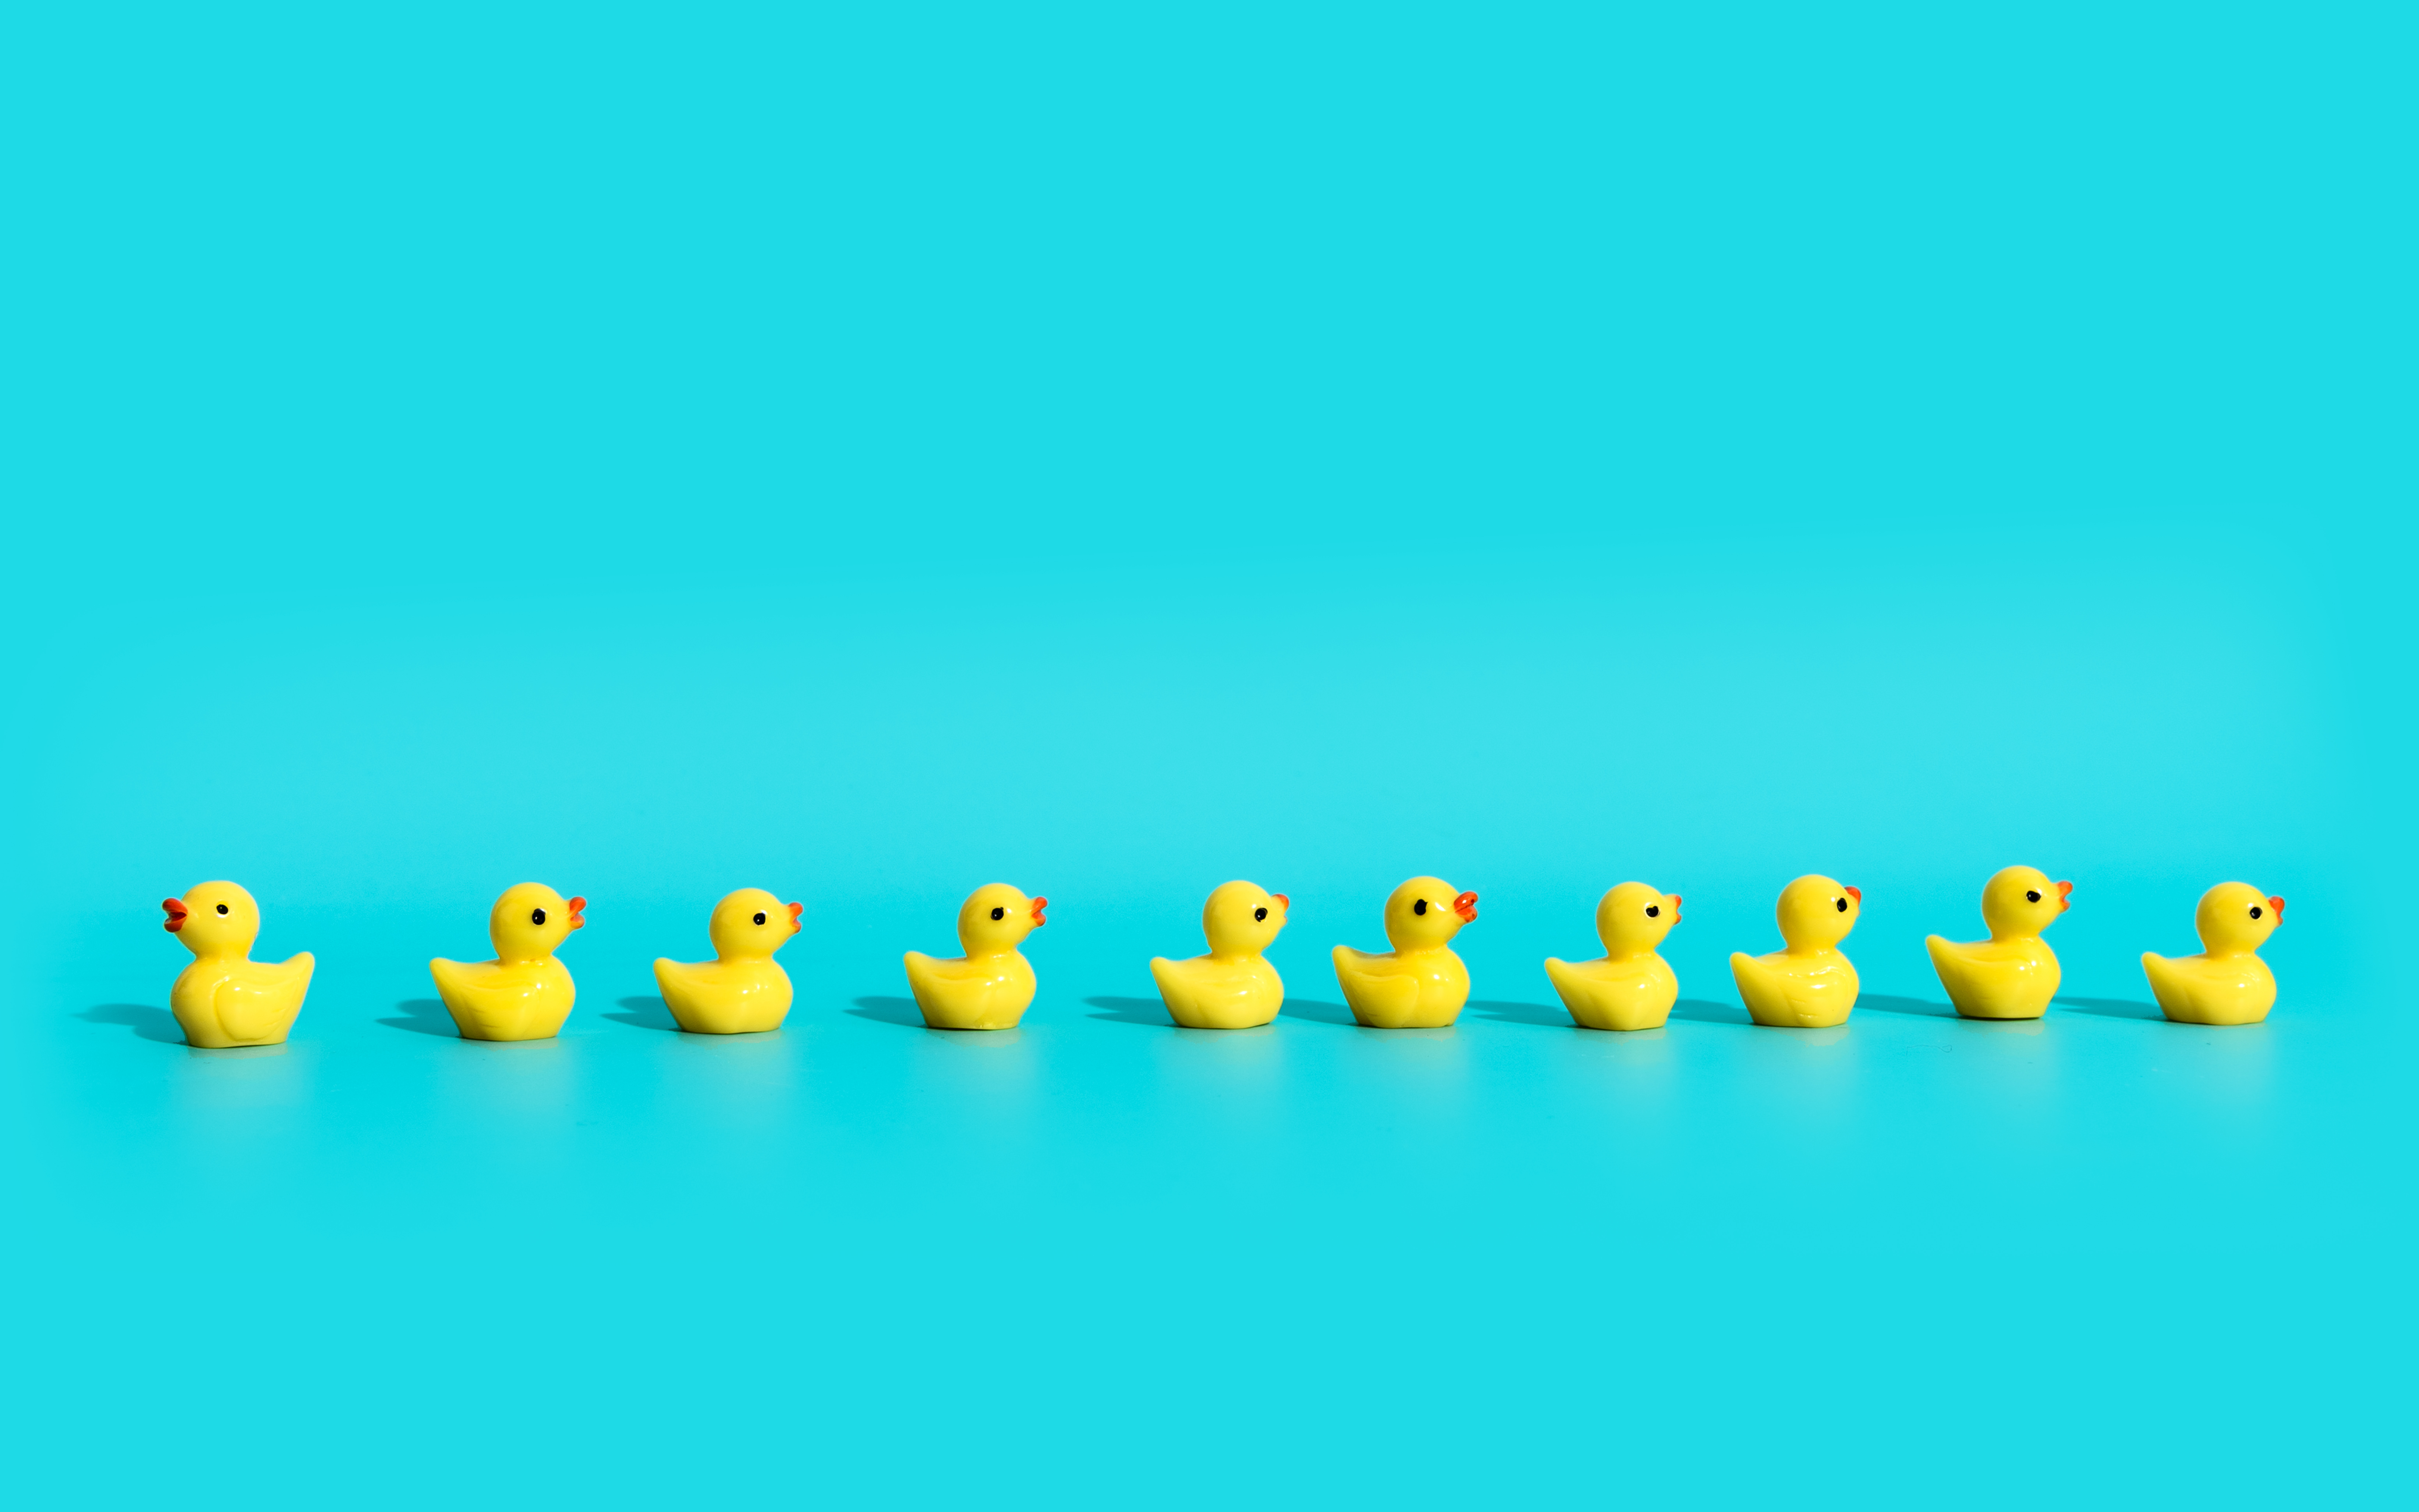 Rubber ducks in a row on an aqua background. Get your raffle prize ducks in a row